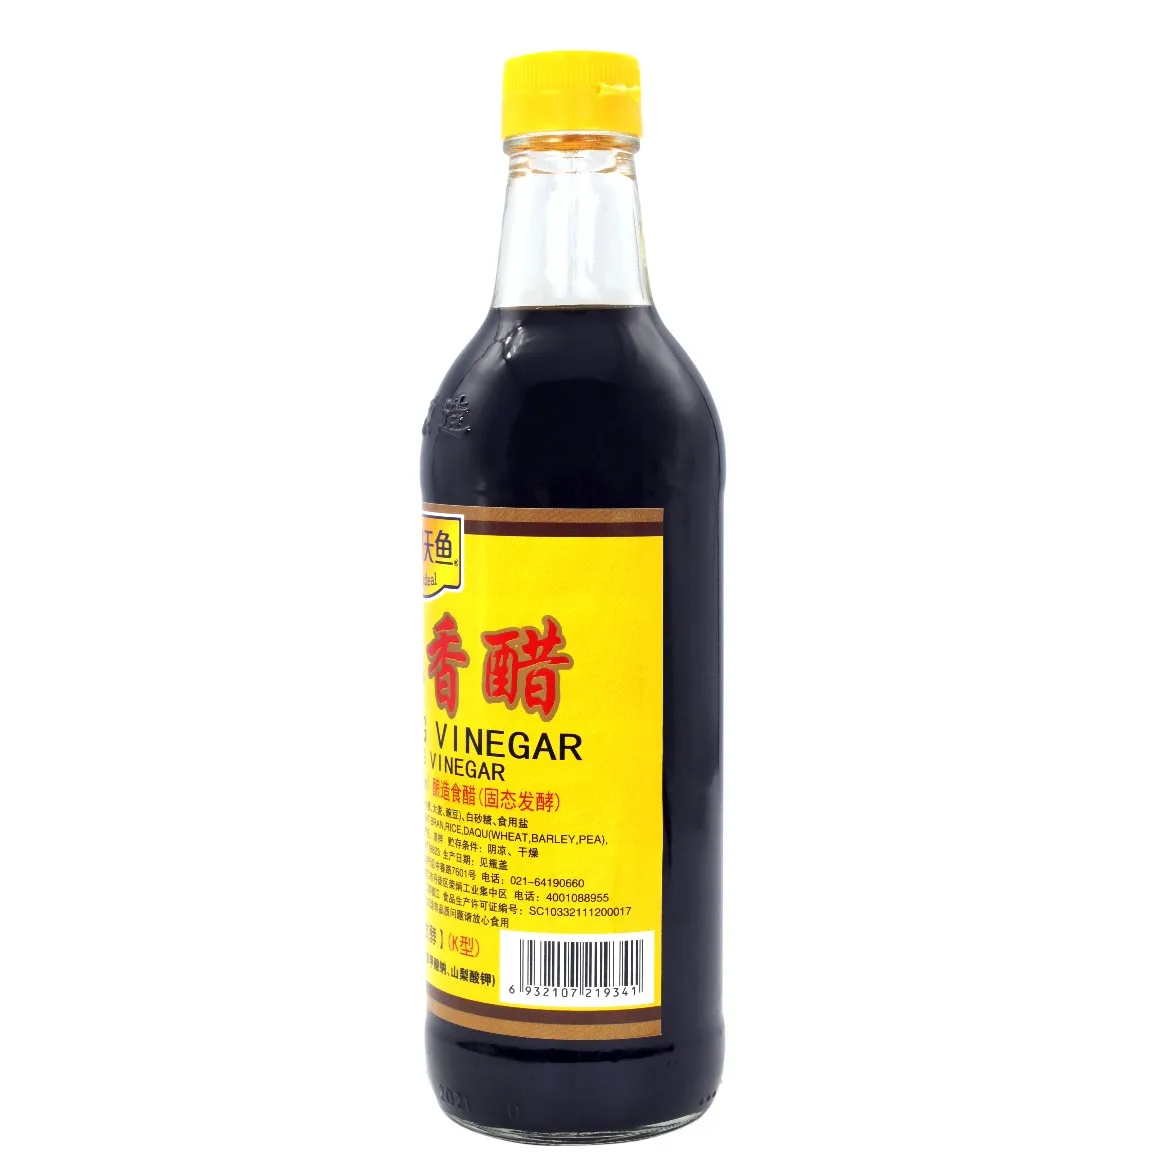 Factory Price Taste Fragrant 500ml Chinkiang Vinegar Baoding Tianyu Beauideal